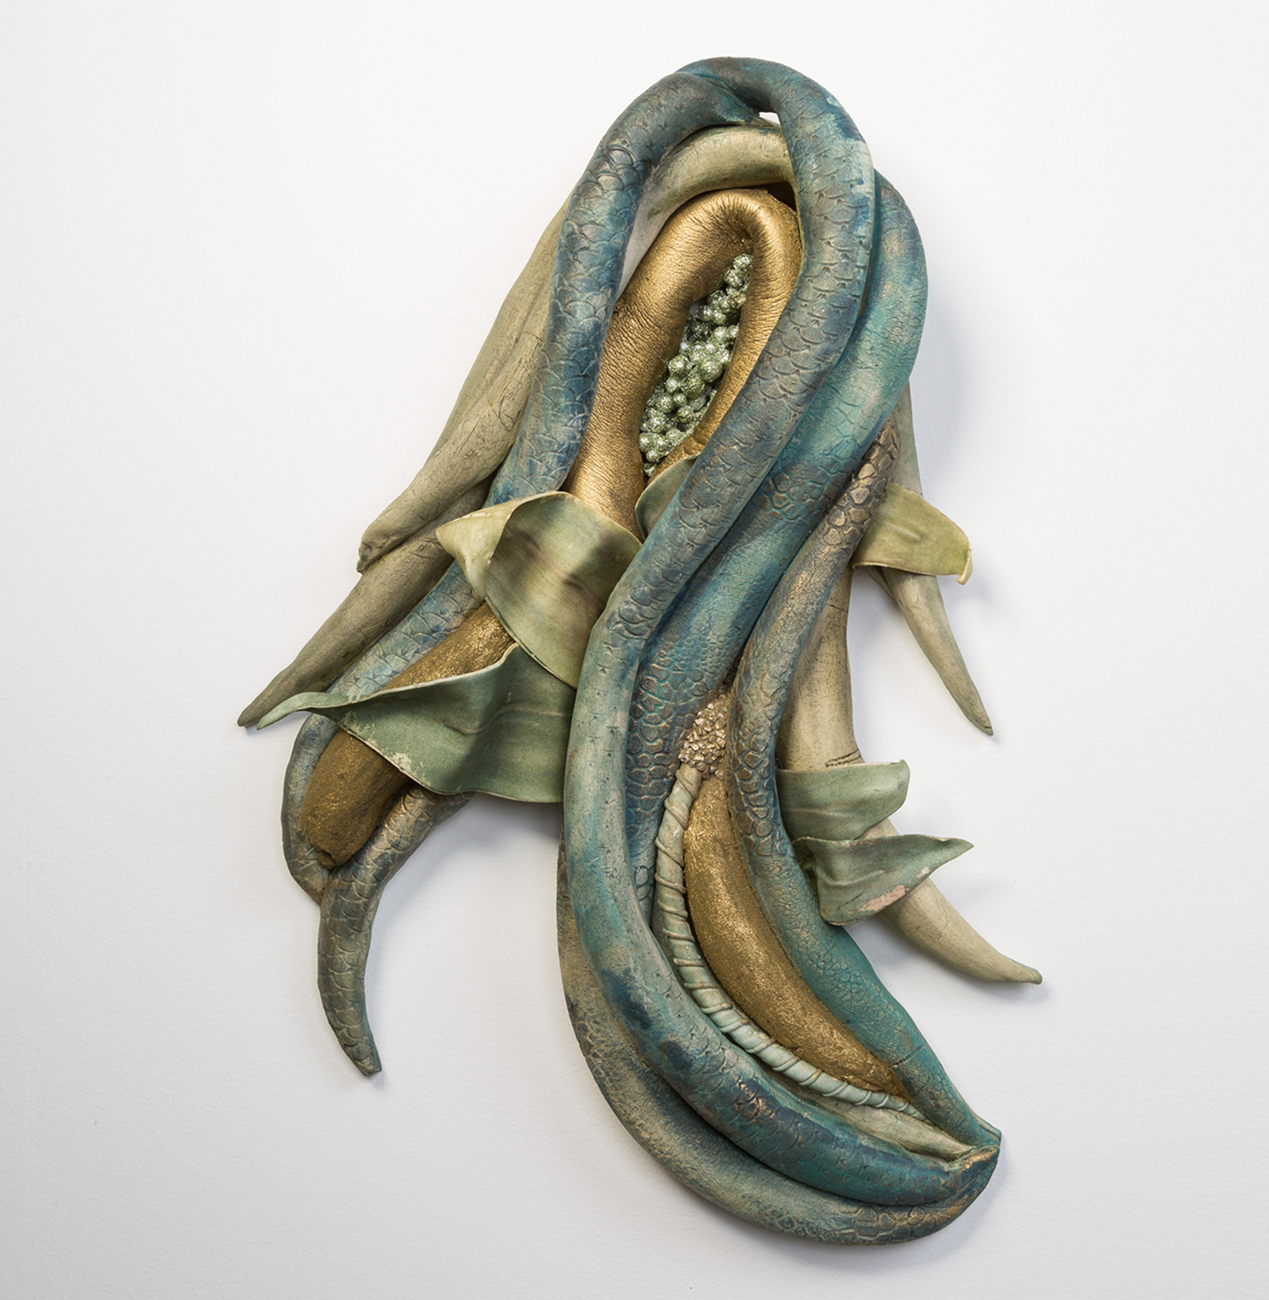   Inseparabili   Fired Clay with Oxides, Underglaze &amp; Mixed Media, 21” x 16” x 5” 